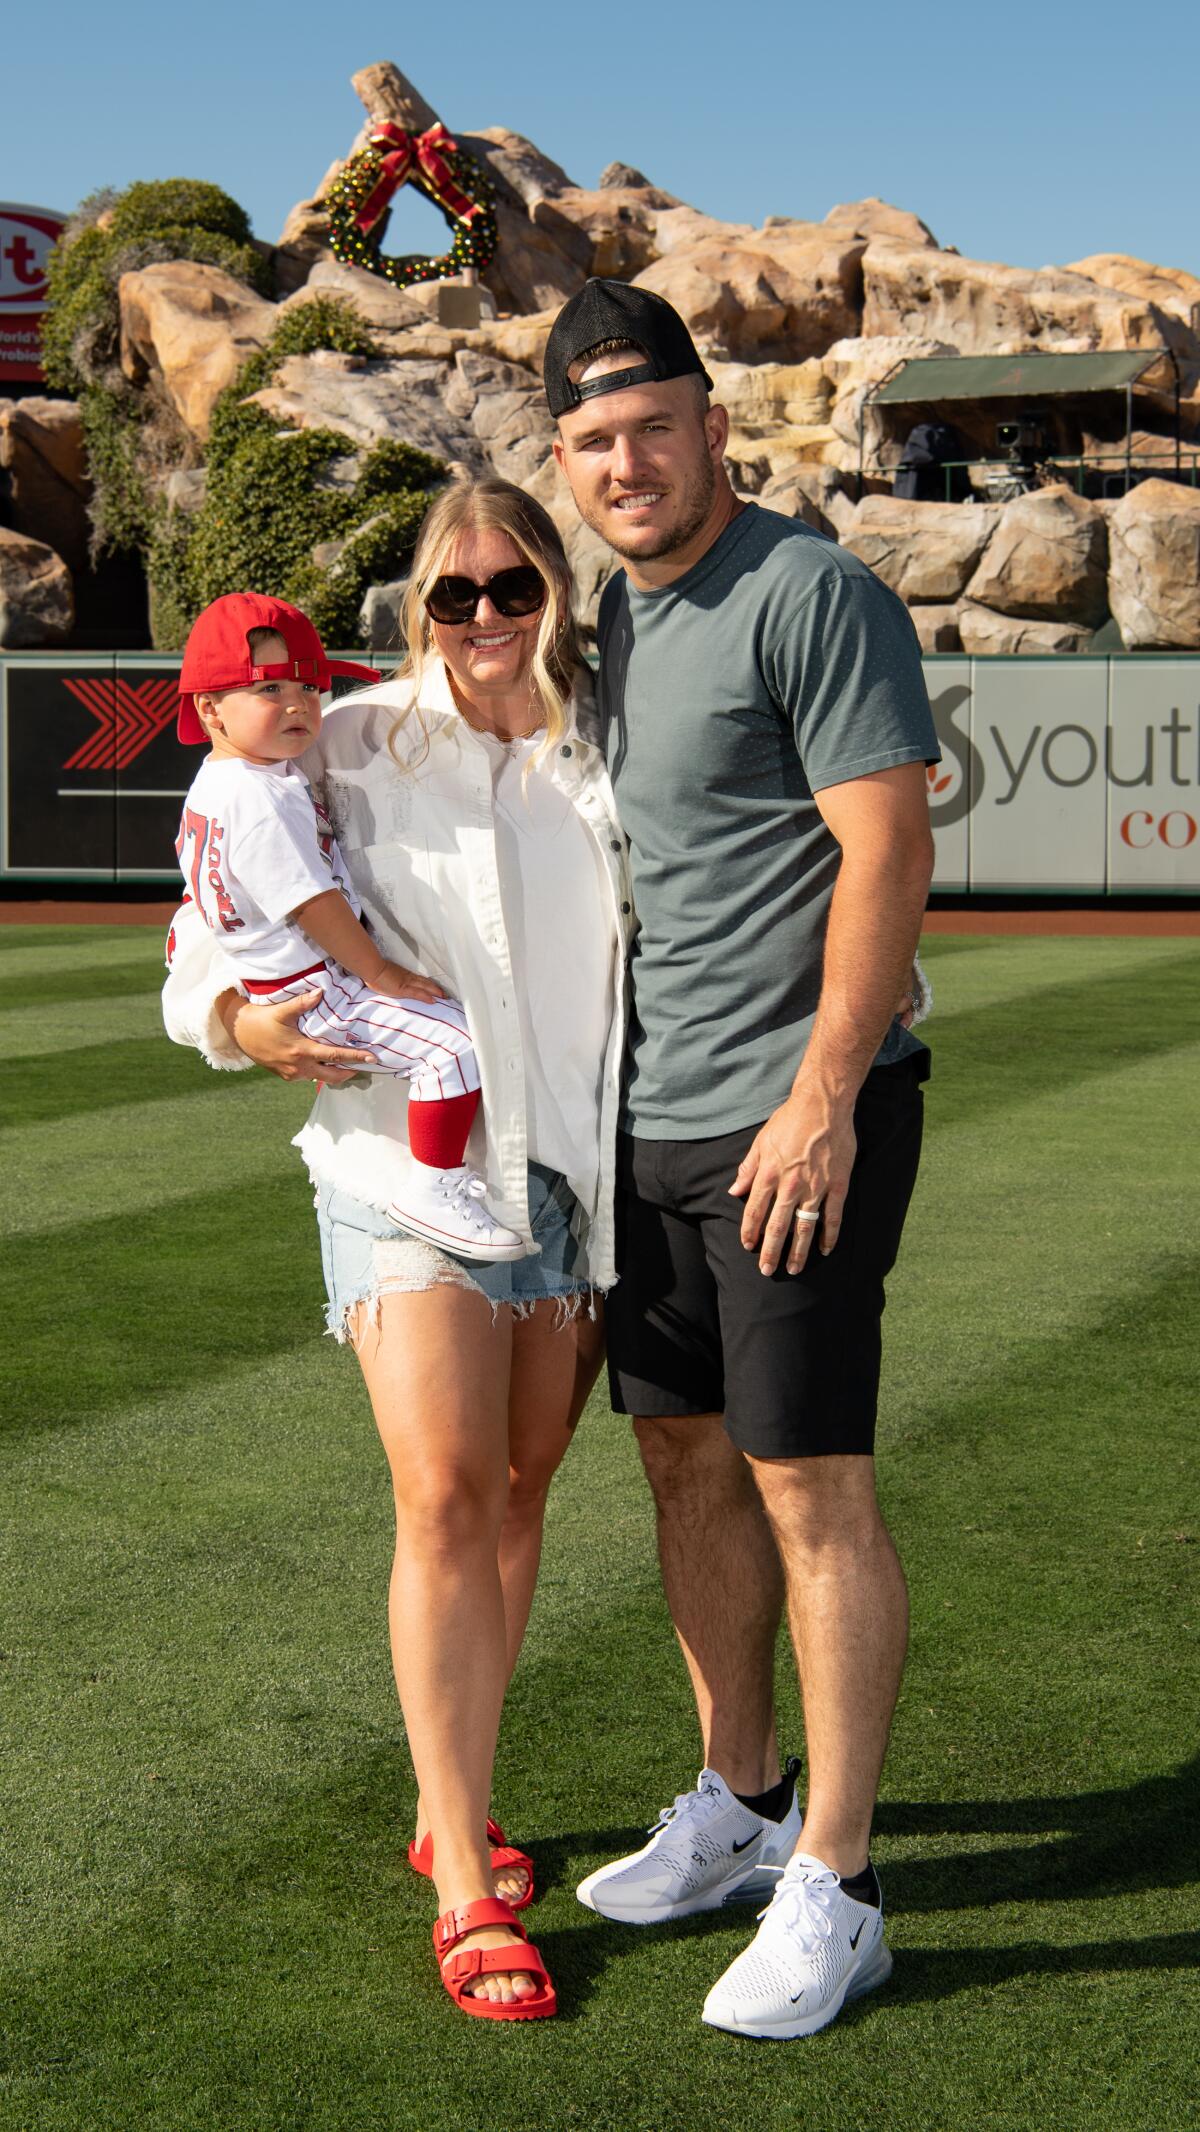 Mike Trout, from right, stands in the outfield with his wife Jessica Cox and child Beckham Aaron Trout